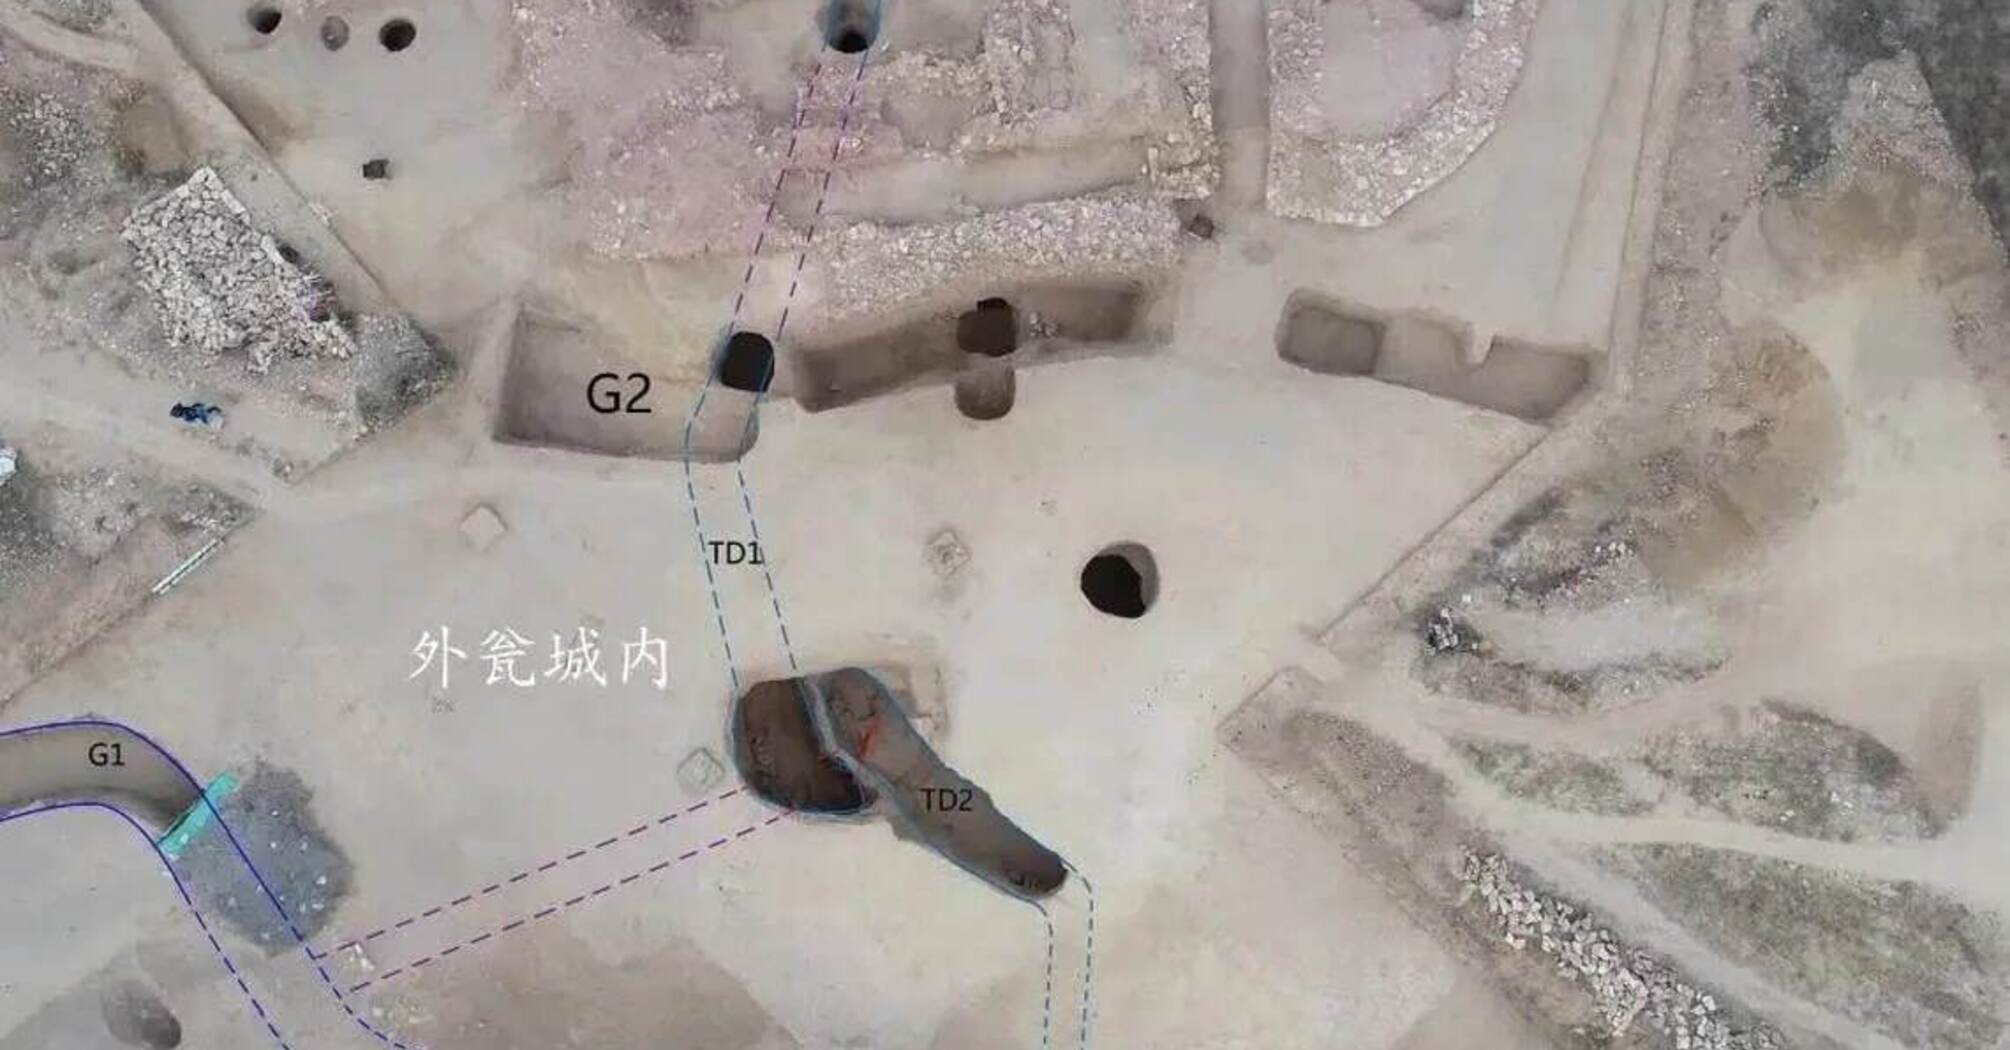 Underground passages in the ruins of an ancient city found in China